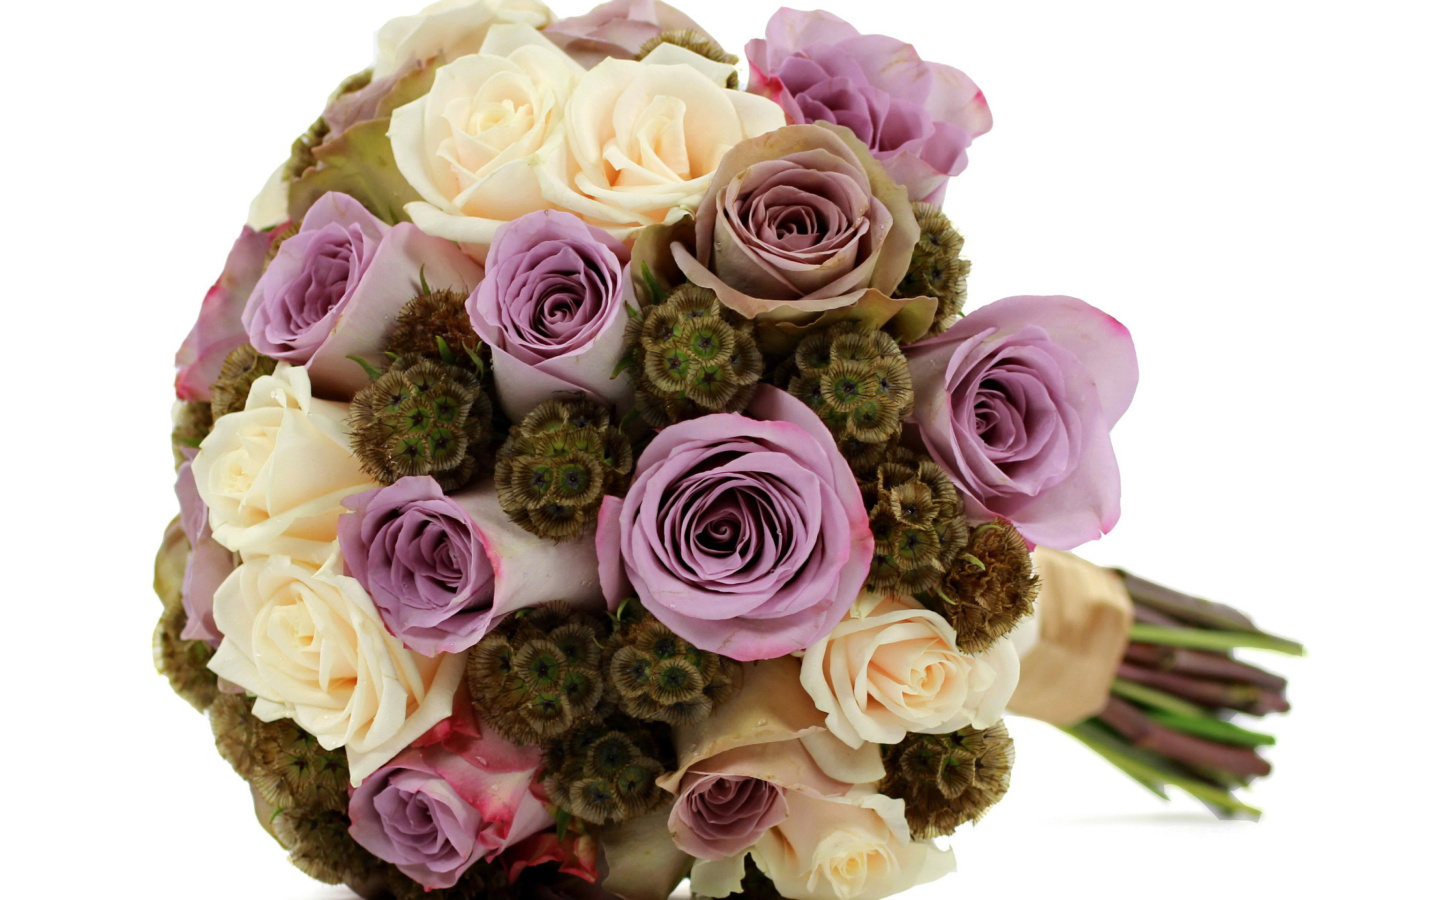 Bouquet with lilac roses screenshot #1 1440x900